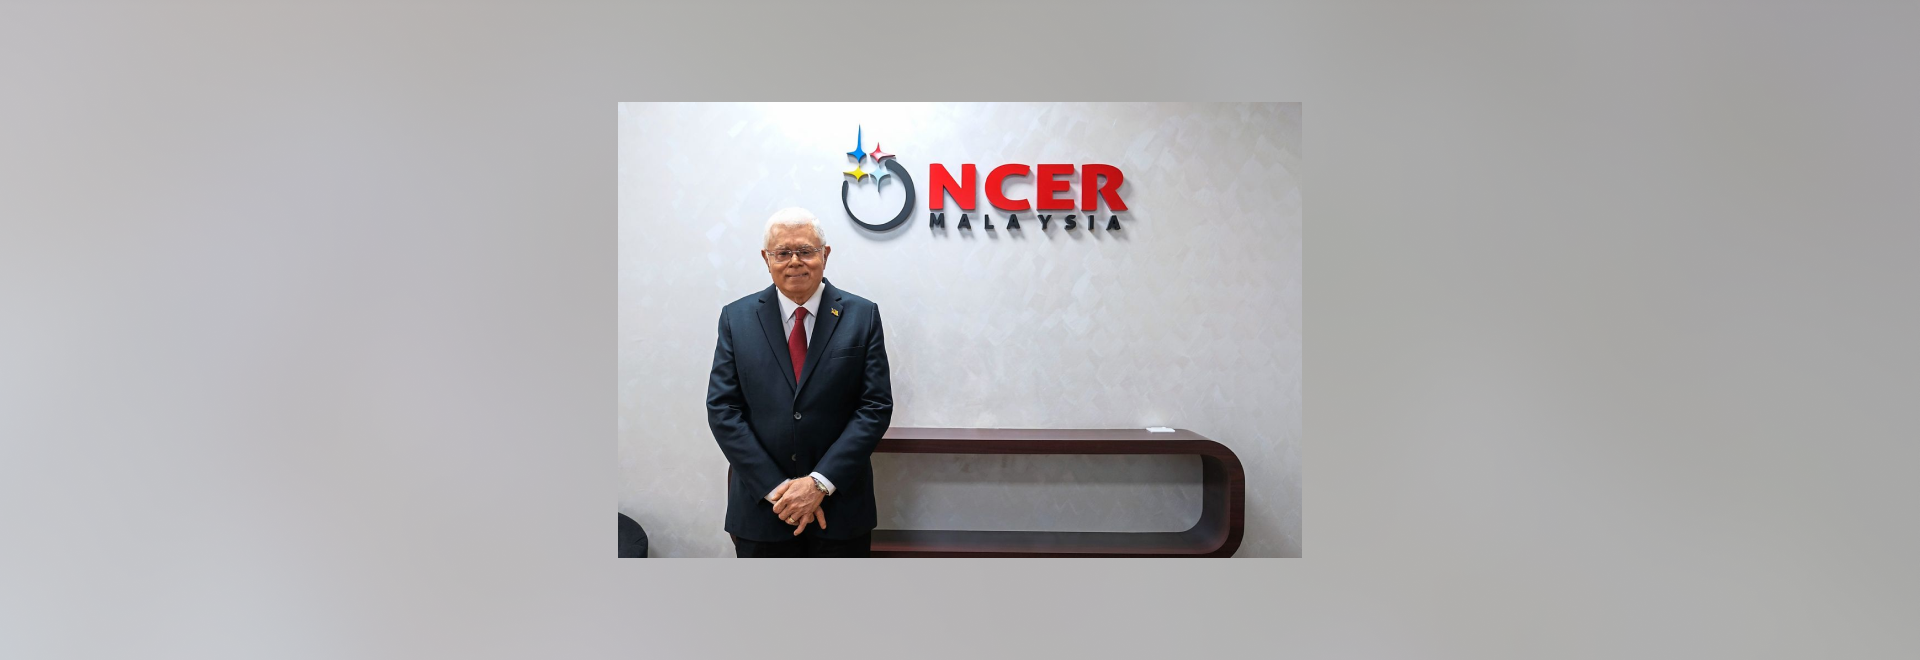 NCER continues to attract high impact investments